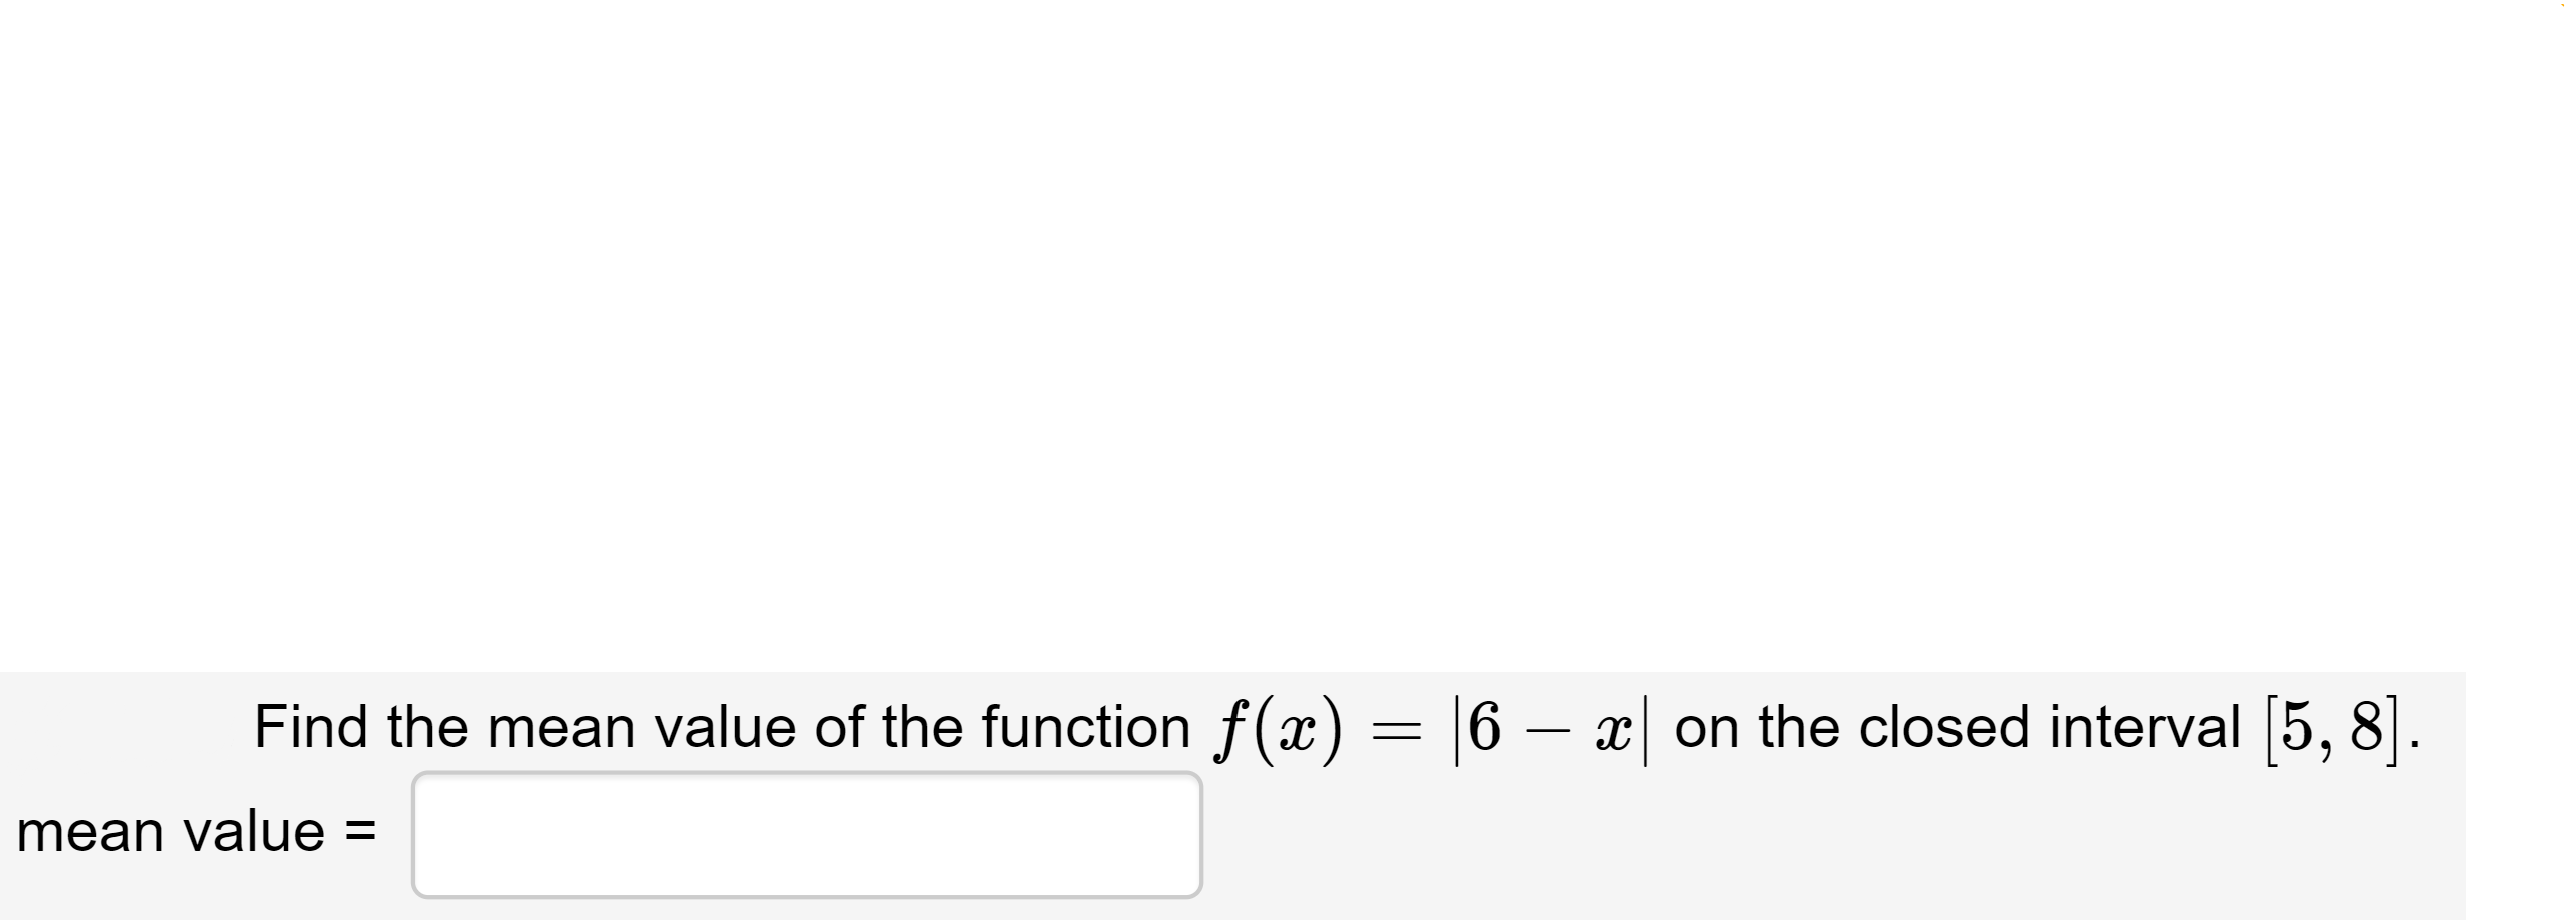 = |6 – x| on the closed interval [5, 8].
Find the mean value of the function f( x)
mean value =
